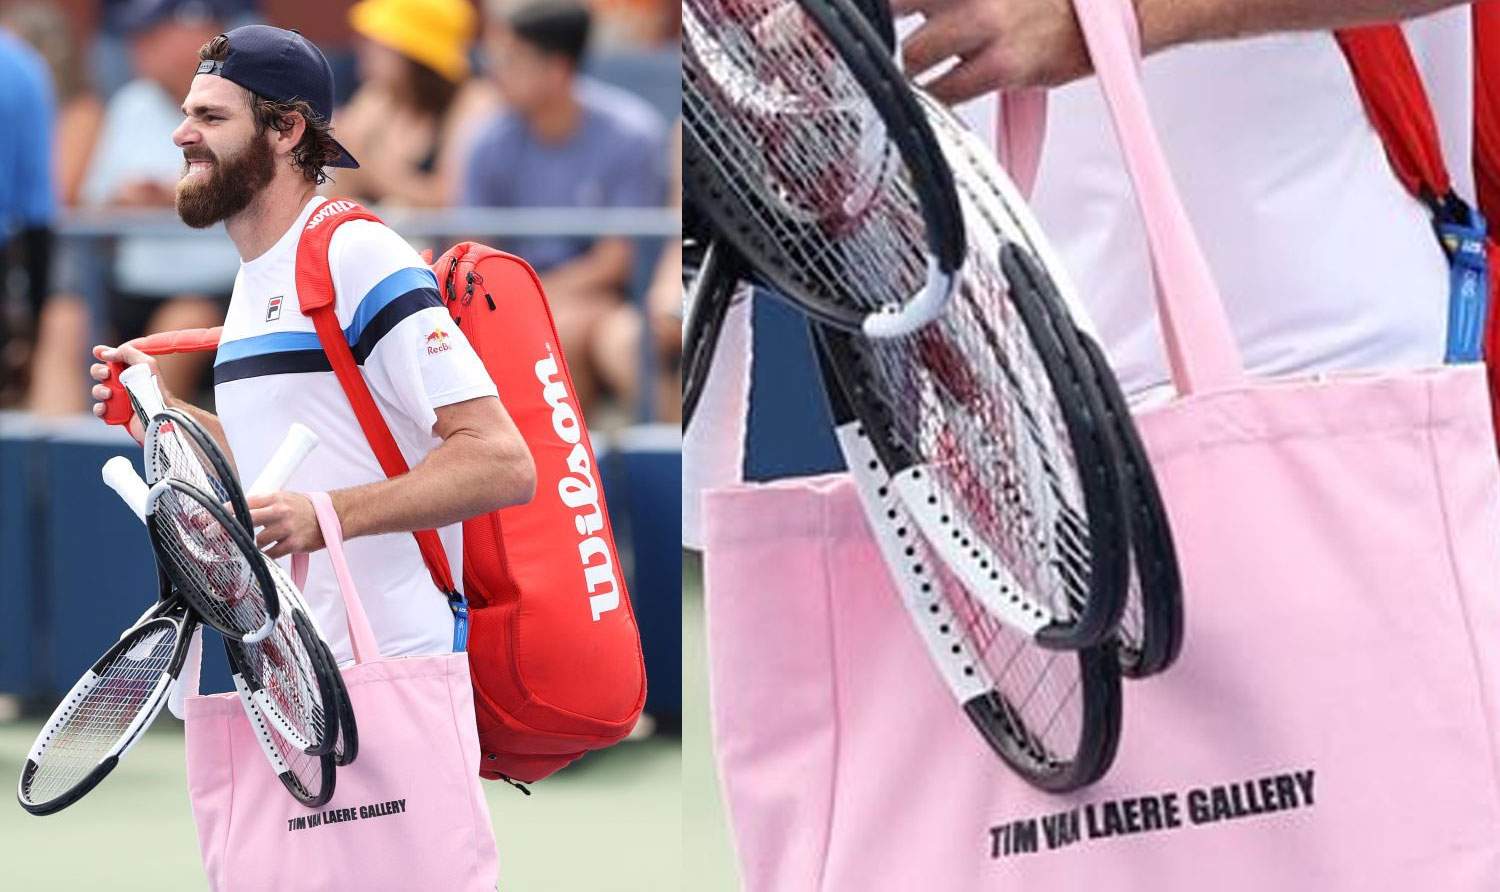 Tennis: Reilly Opelka fined at US Open for showing art gallery bag